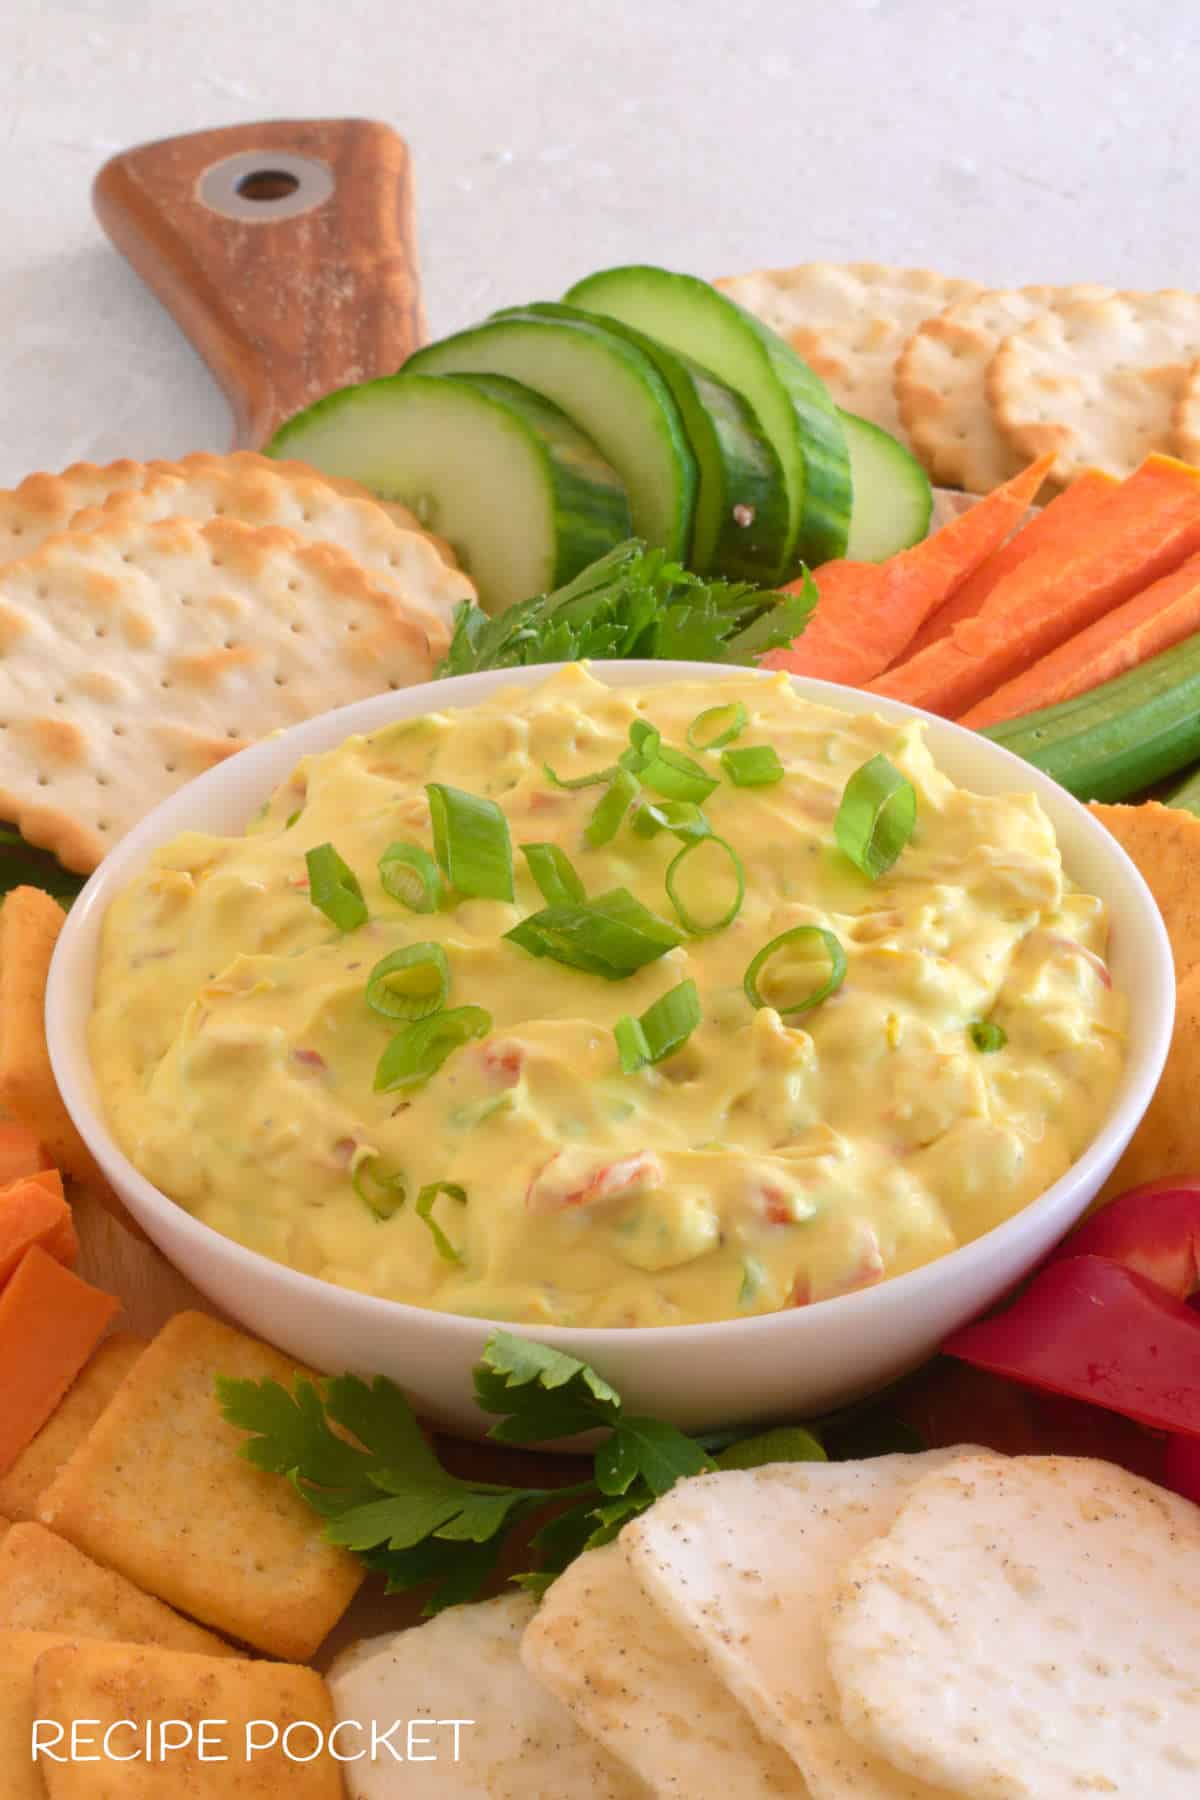 A close up of cream cheese corn dip surrounded by veggies and crackers.